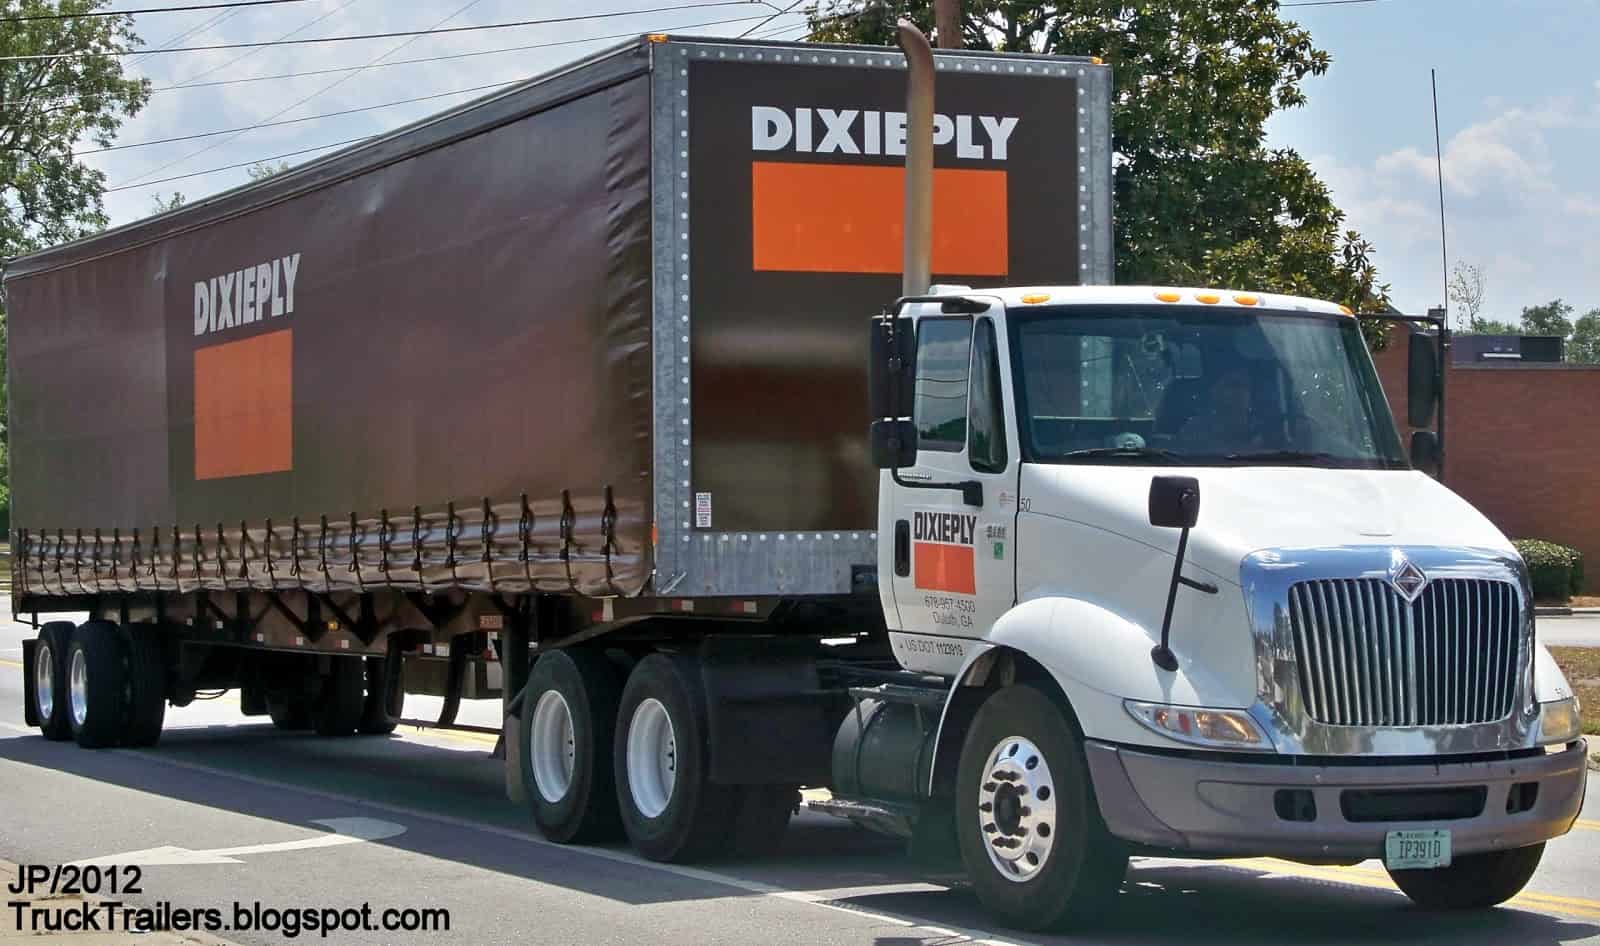 Dixieply – Leading Wholesale Distributor of Building Materials